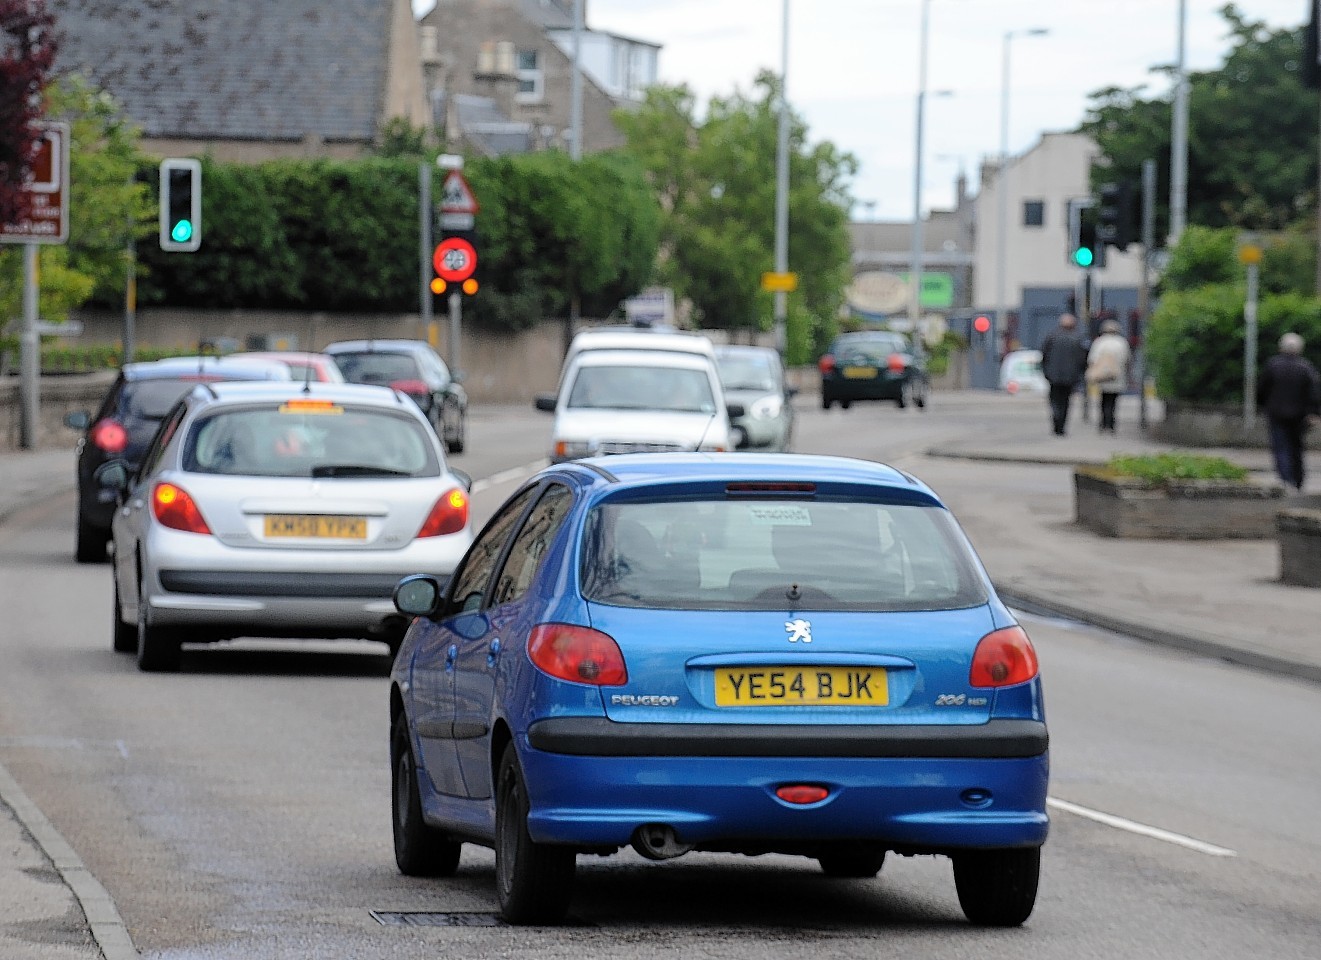 Nairn traffic lights will be upgraded this week.